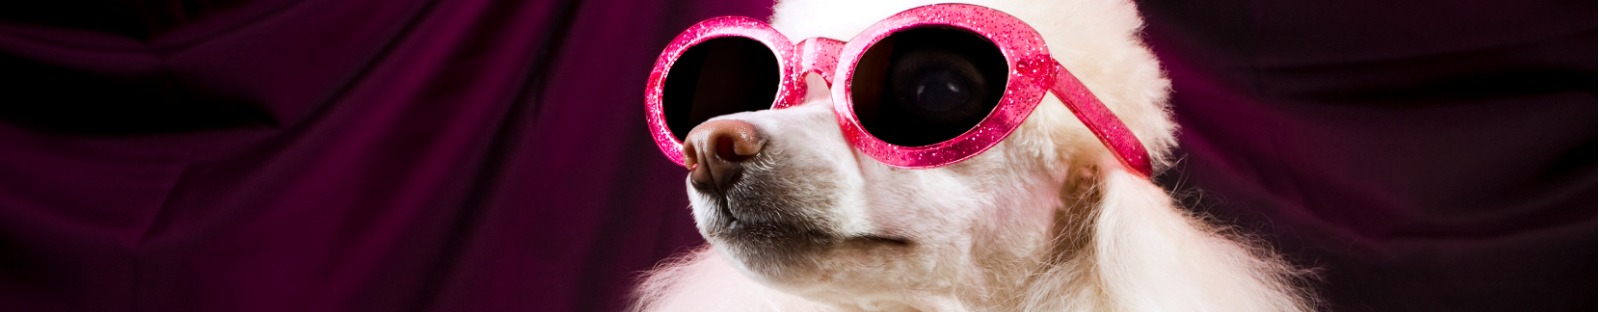 Poodle wearing sunglasses